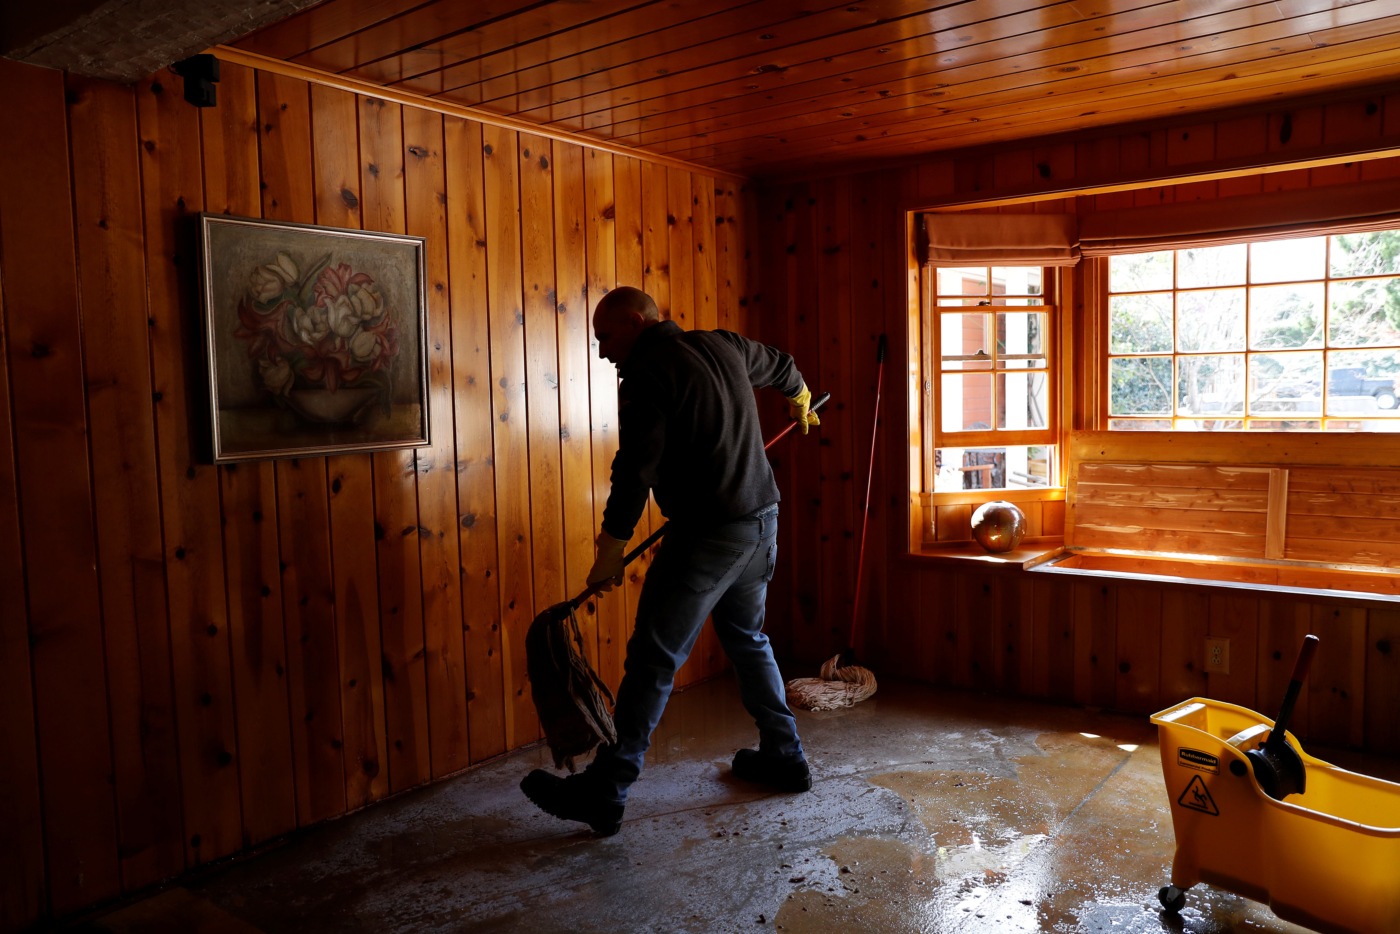 Alessio Roic mops up flood water inside the home of neighbor Judy Georges after an overflowed Coyote Creek flooded neighborhoods and prompted an evacuation in San Jose, California, U.S., February 22, 2017. REUTERS/Stephen Lam